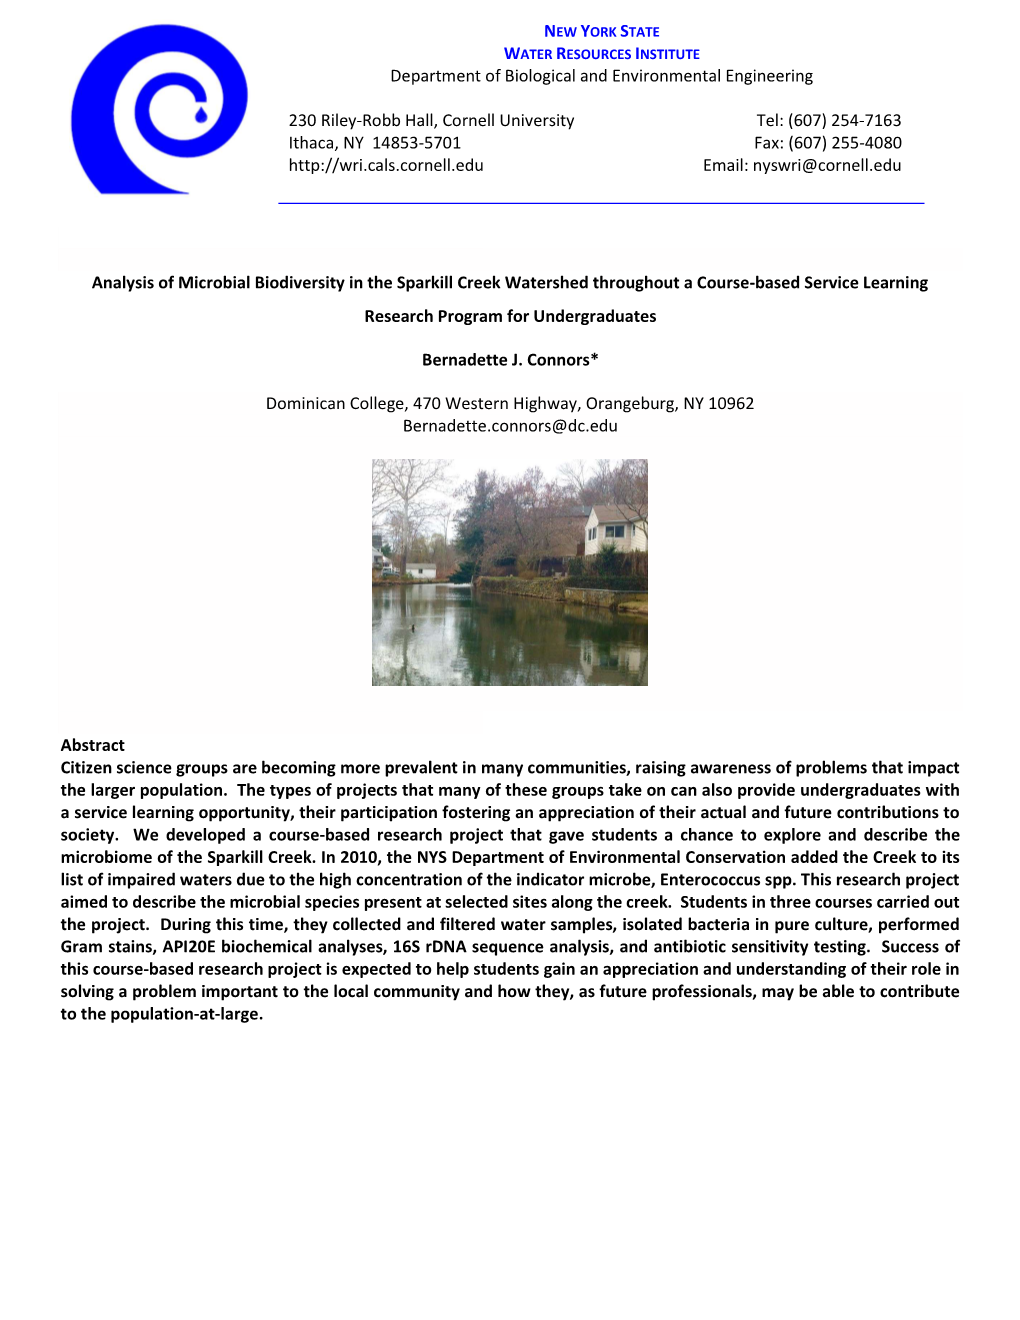 Analysis of Biodiversity in the Sparkill Creek Watershed As a Course-Based Service Learning Undergraduate Experience